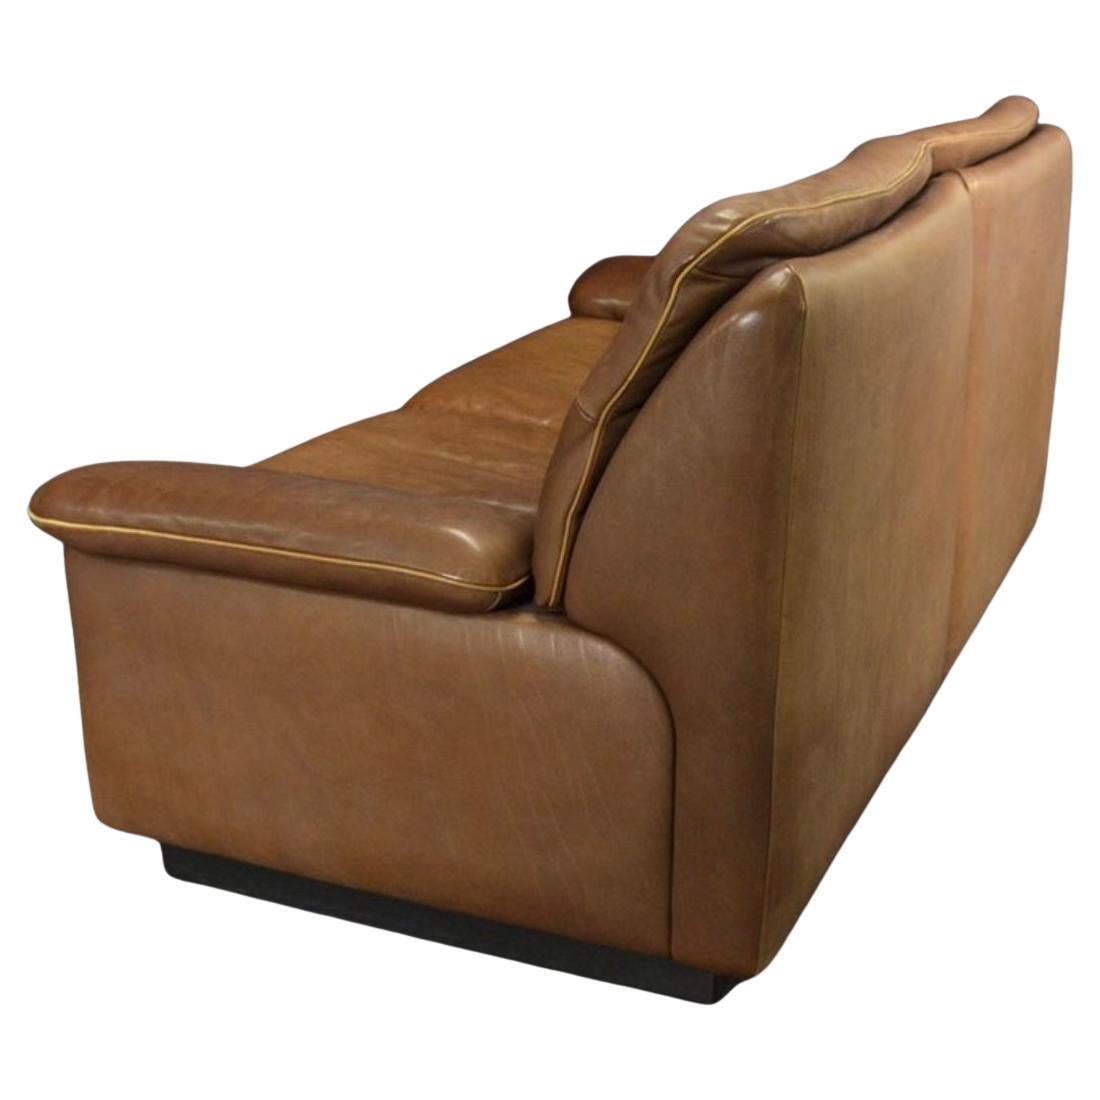 Swiss De Sede DS 66 Chocolate Leather Loveseat and Lounge Chairs Set of 3 For Sale